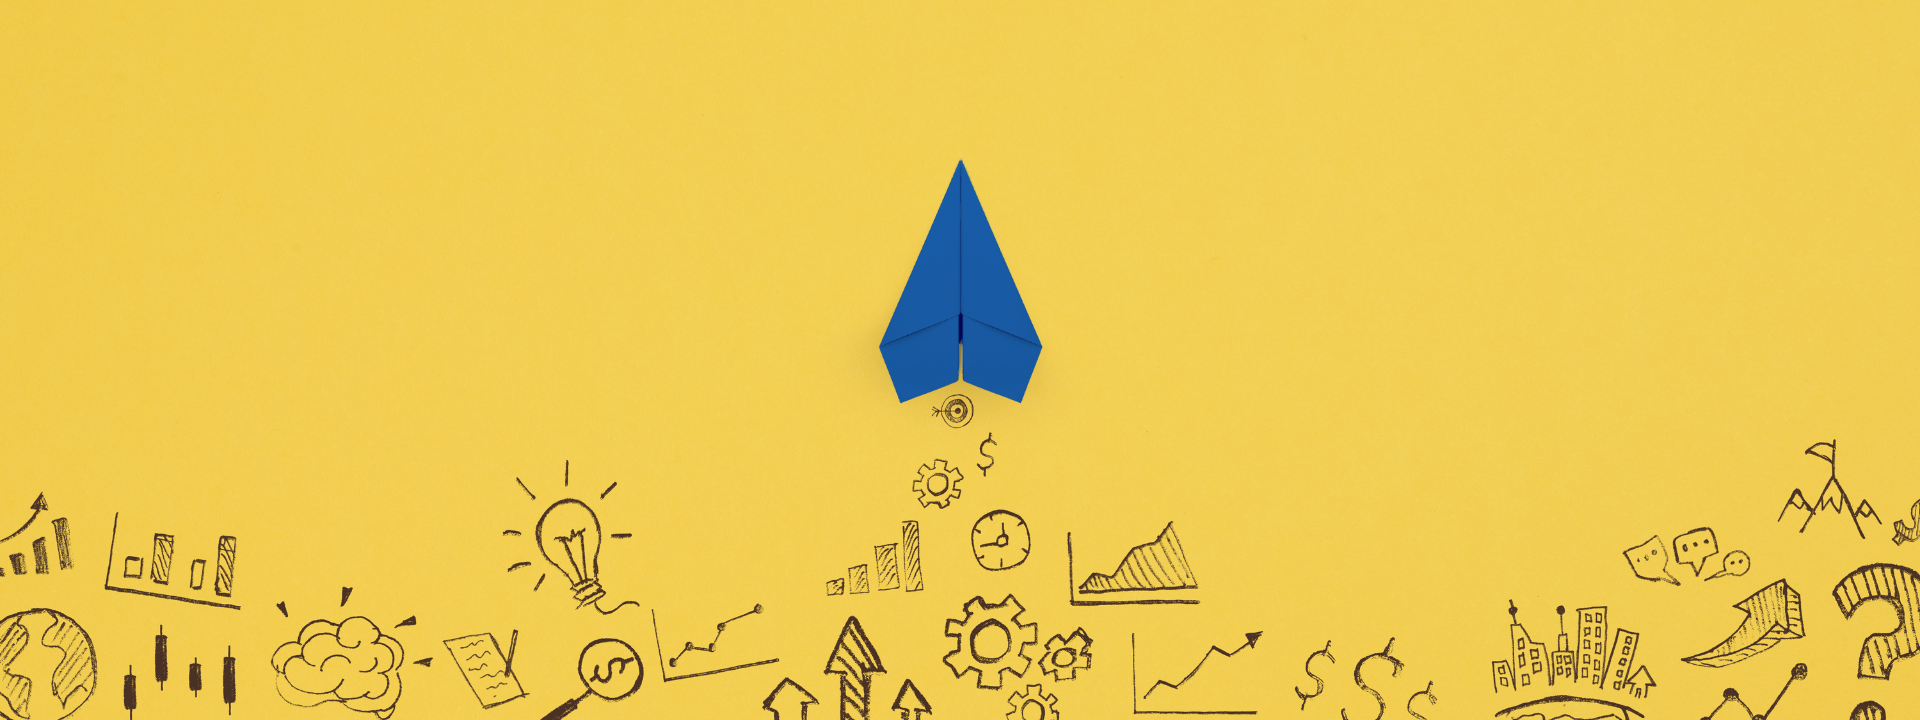 Blue paper plane on yellow background. Source Adobe Stock